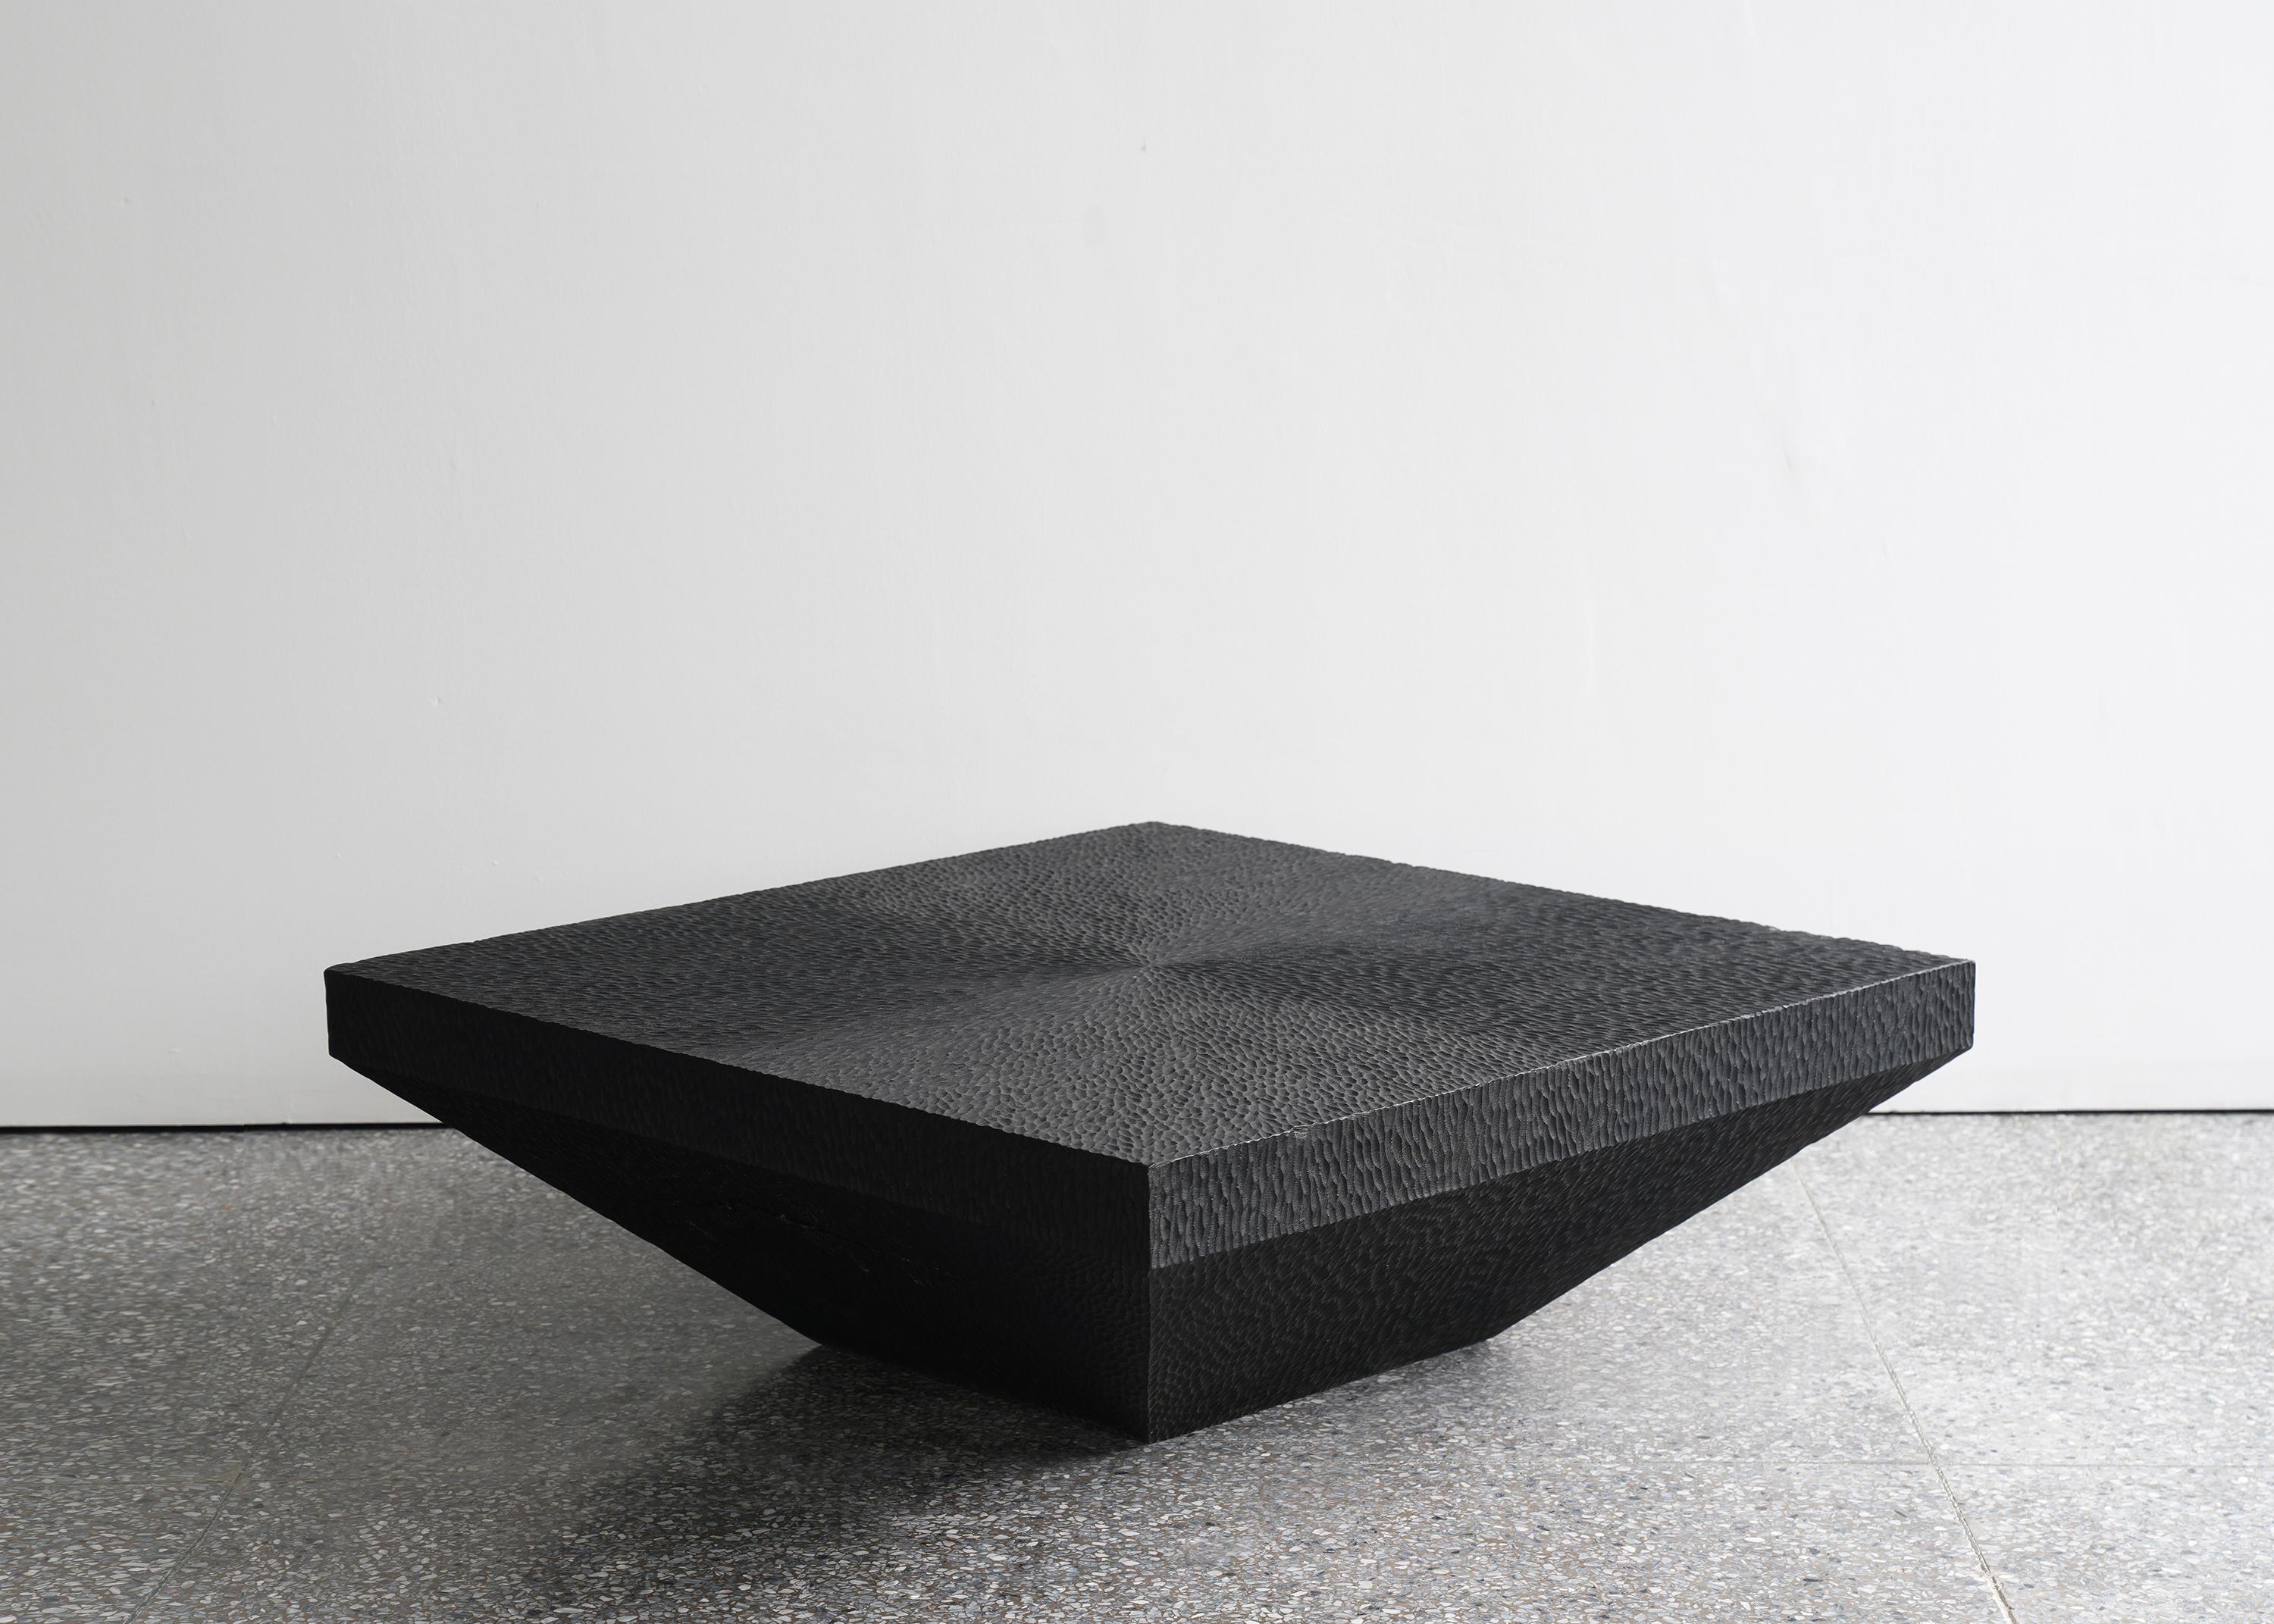 Epang 04 coffee table by Sing Chan Design
Dimensions: W 80 x D 80 x H 25 cm
Materials: Manual sculpture, teak, black paint, waxing.

Sing Chan ( Chinese: 陈星宇/Xingyu Chen) , the founder of SINGCHAN DESIGN, was born in 1990, and graduated from the